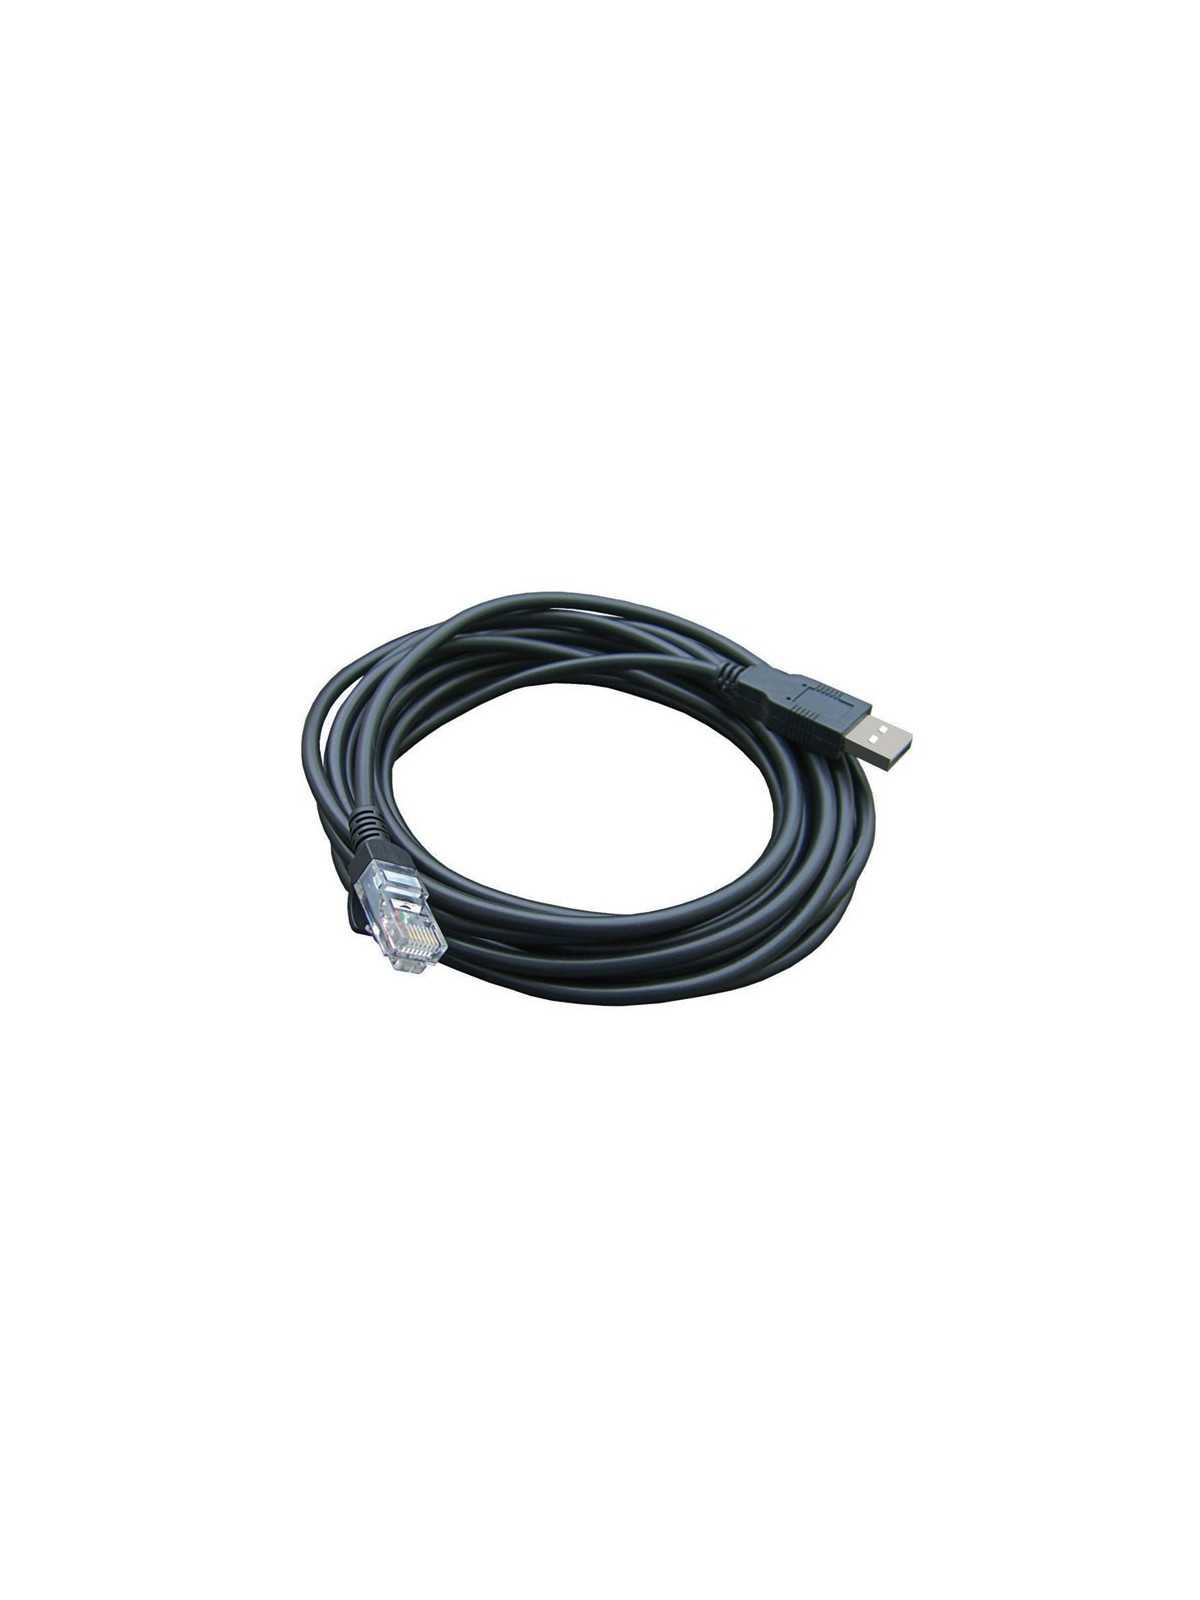 USB - Cable RG45